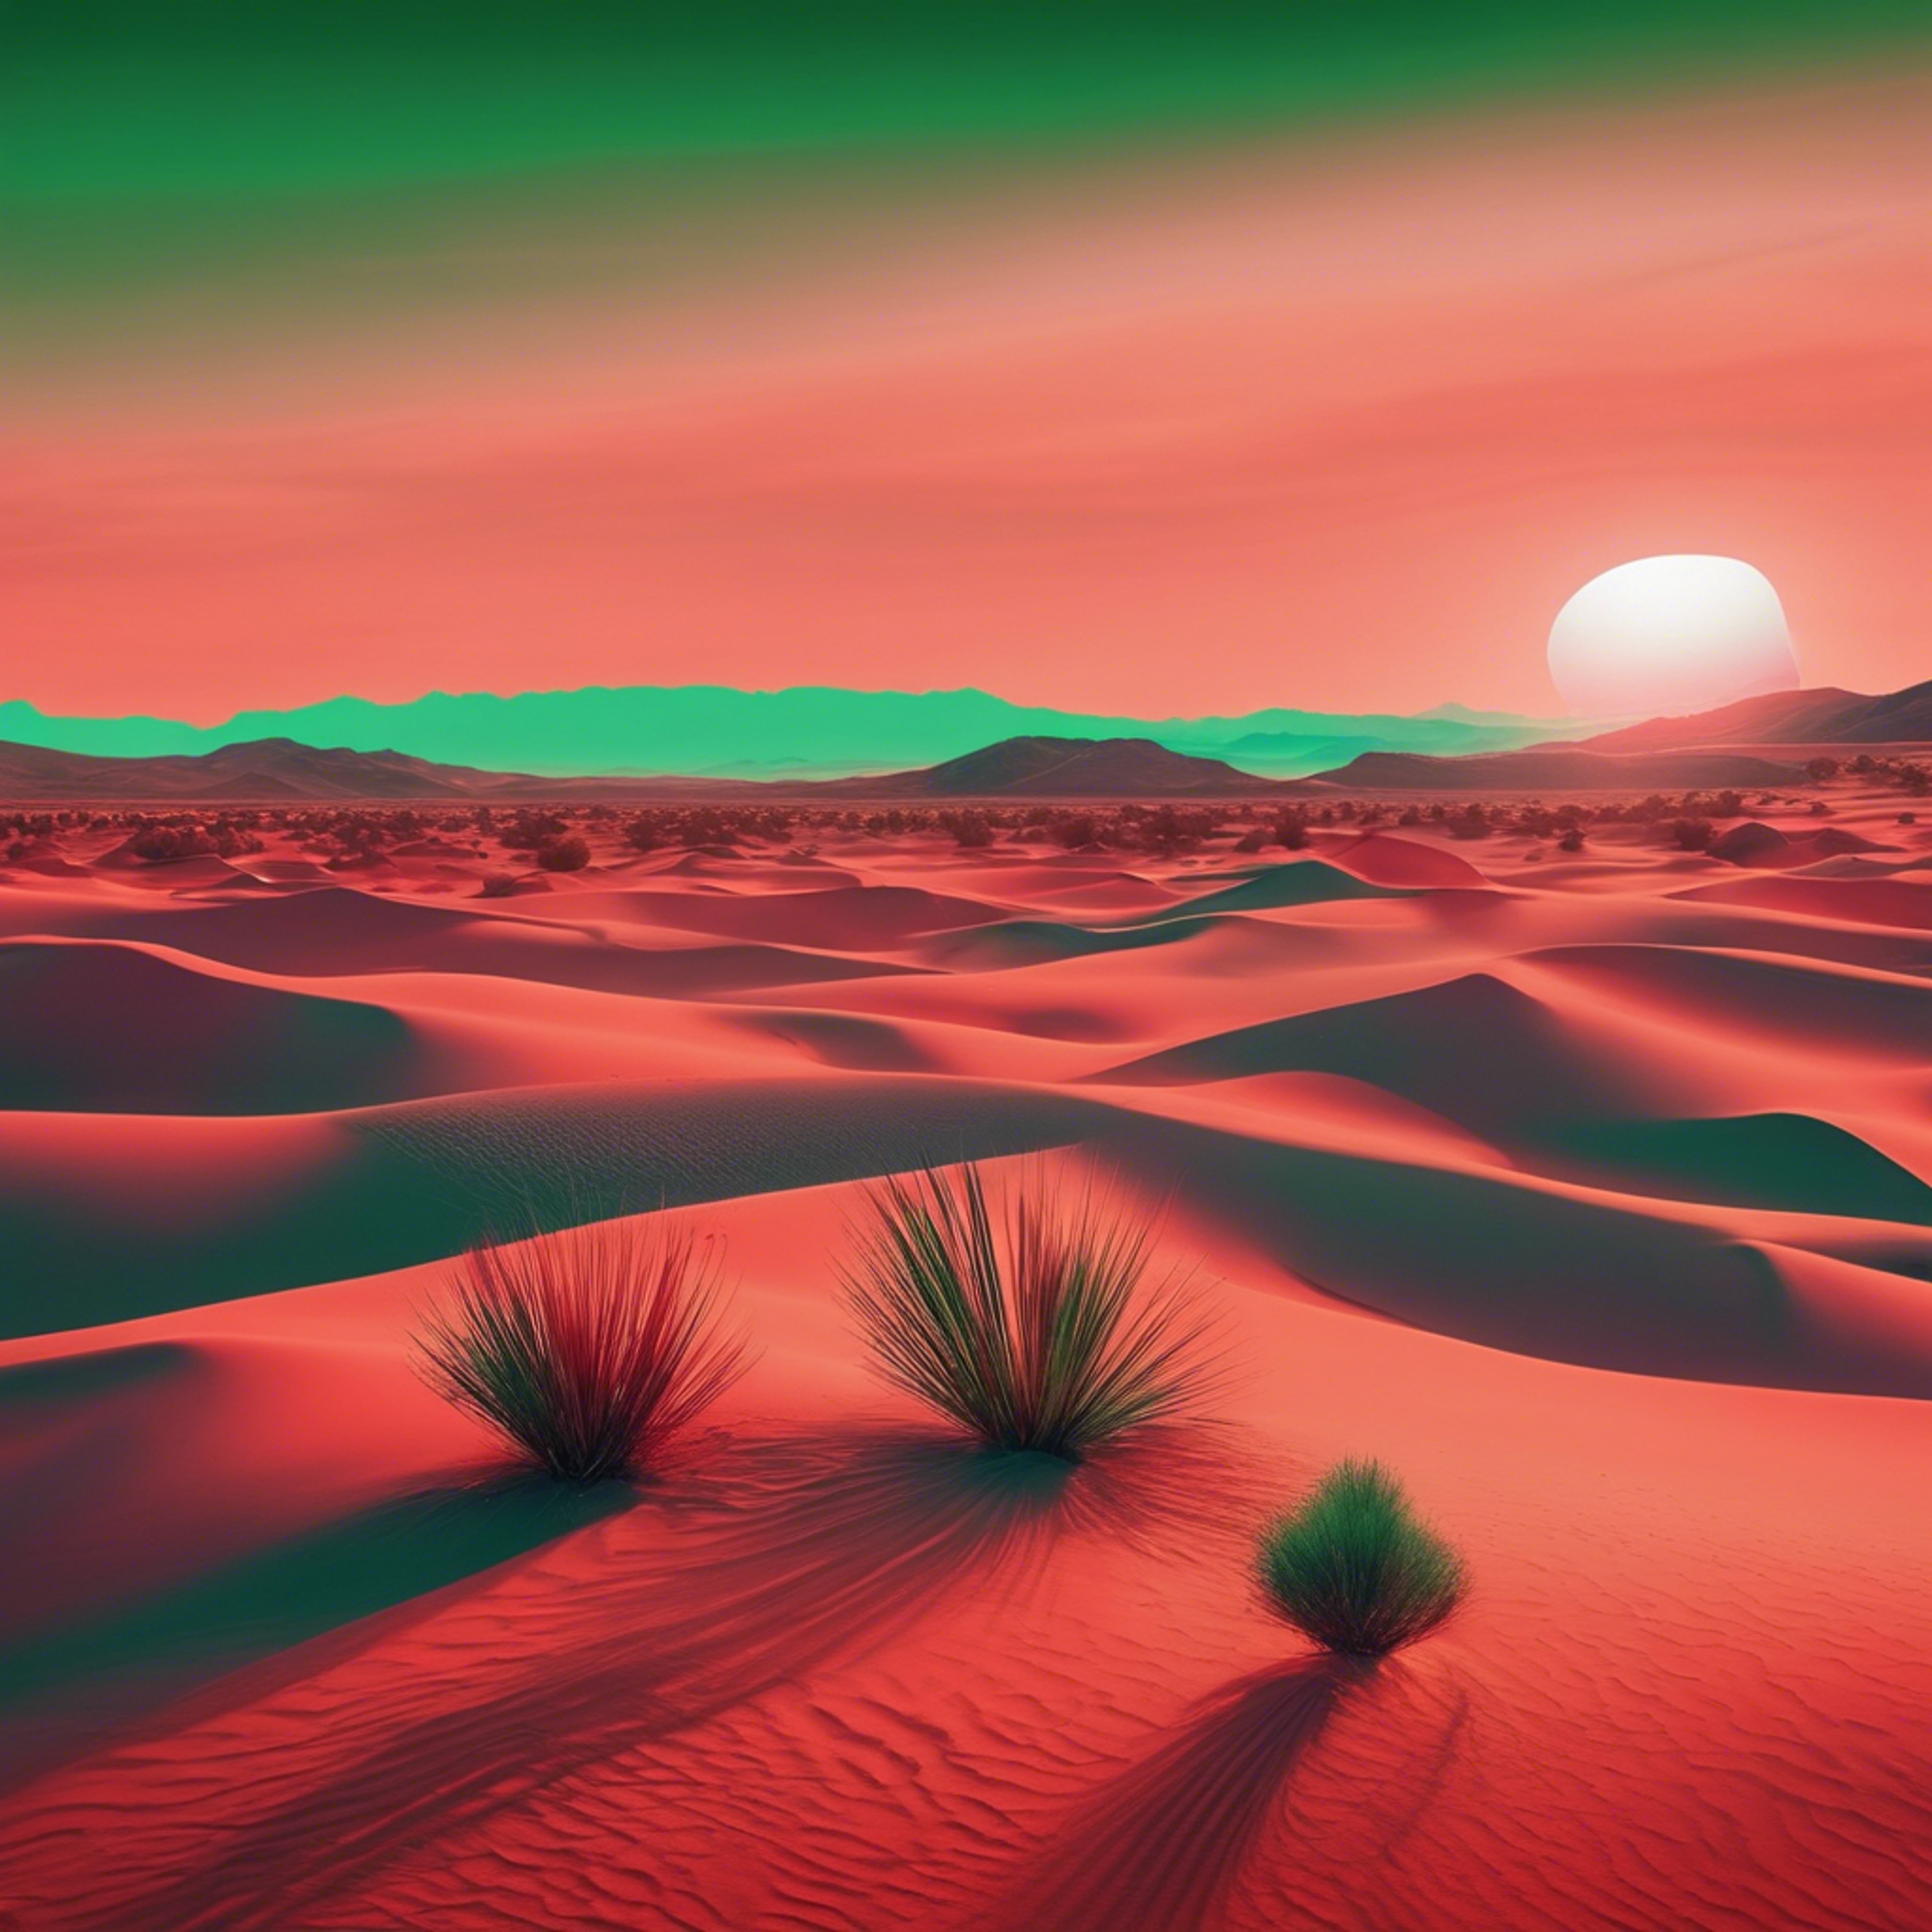 Abstract mirage in red and green, reminiscent of a modern artist's take on a desert sunset Tapeta[3a4ec3a043b54638a7ad]